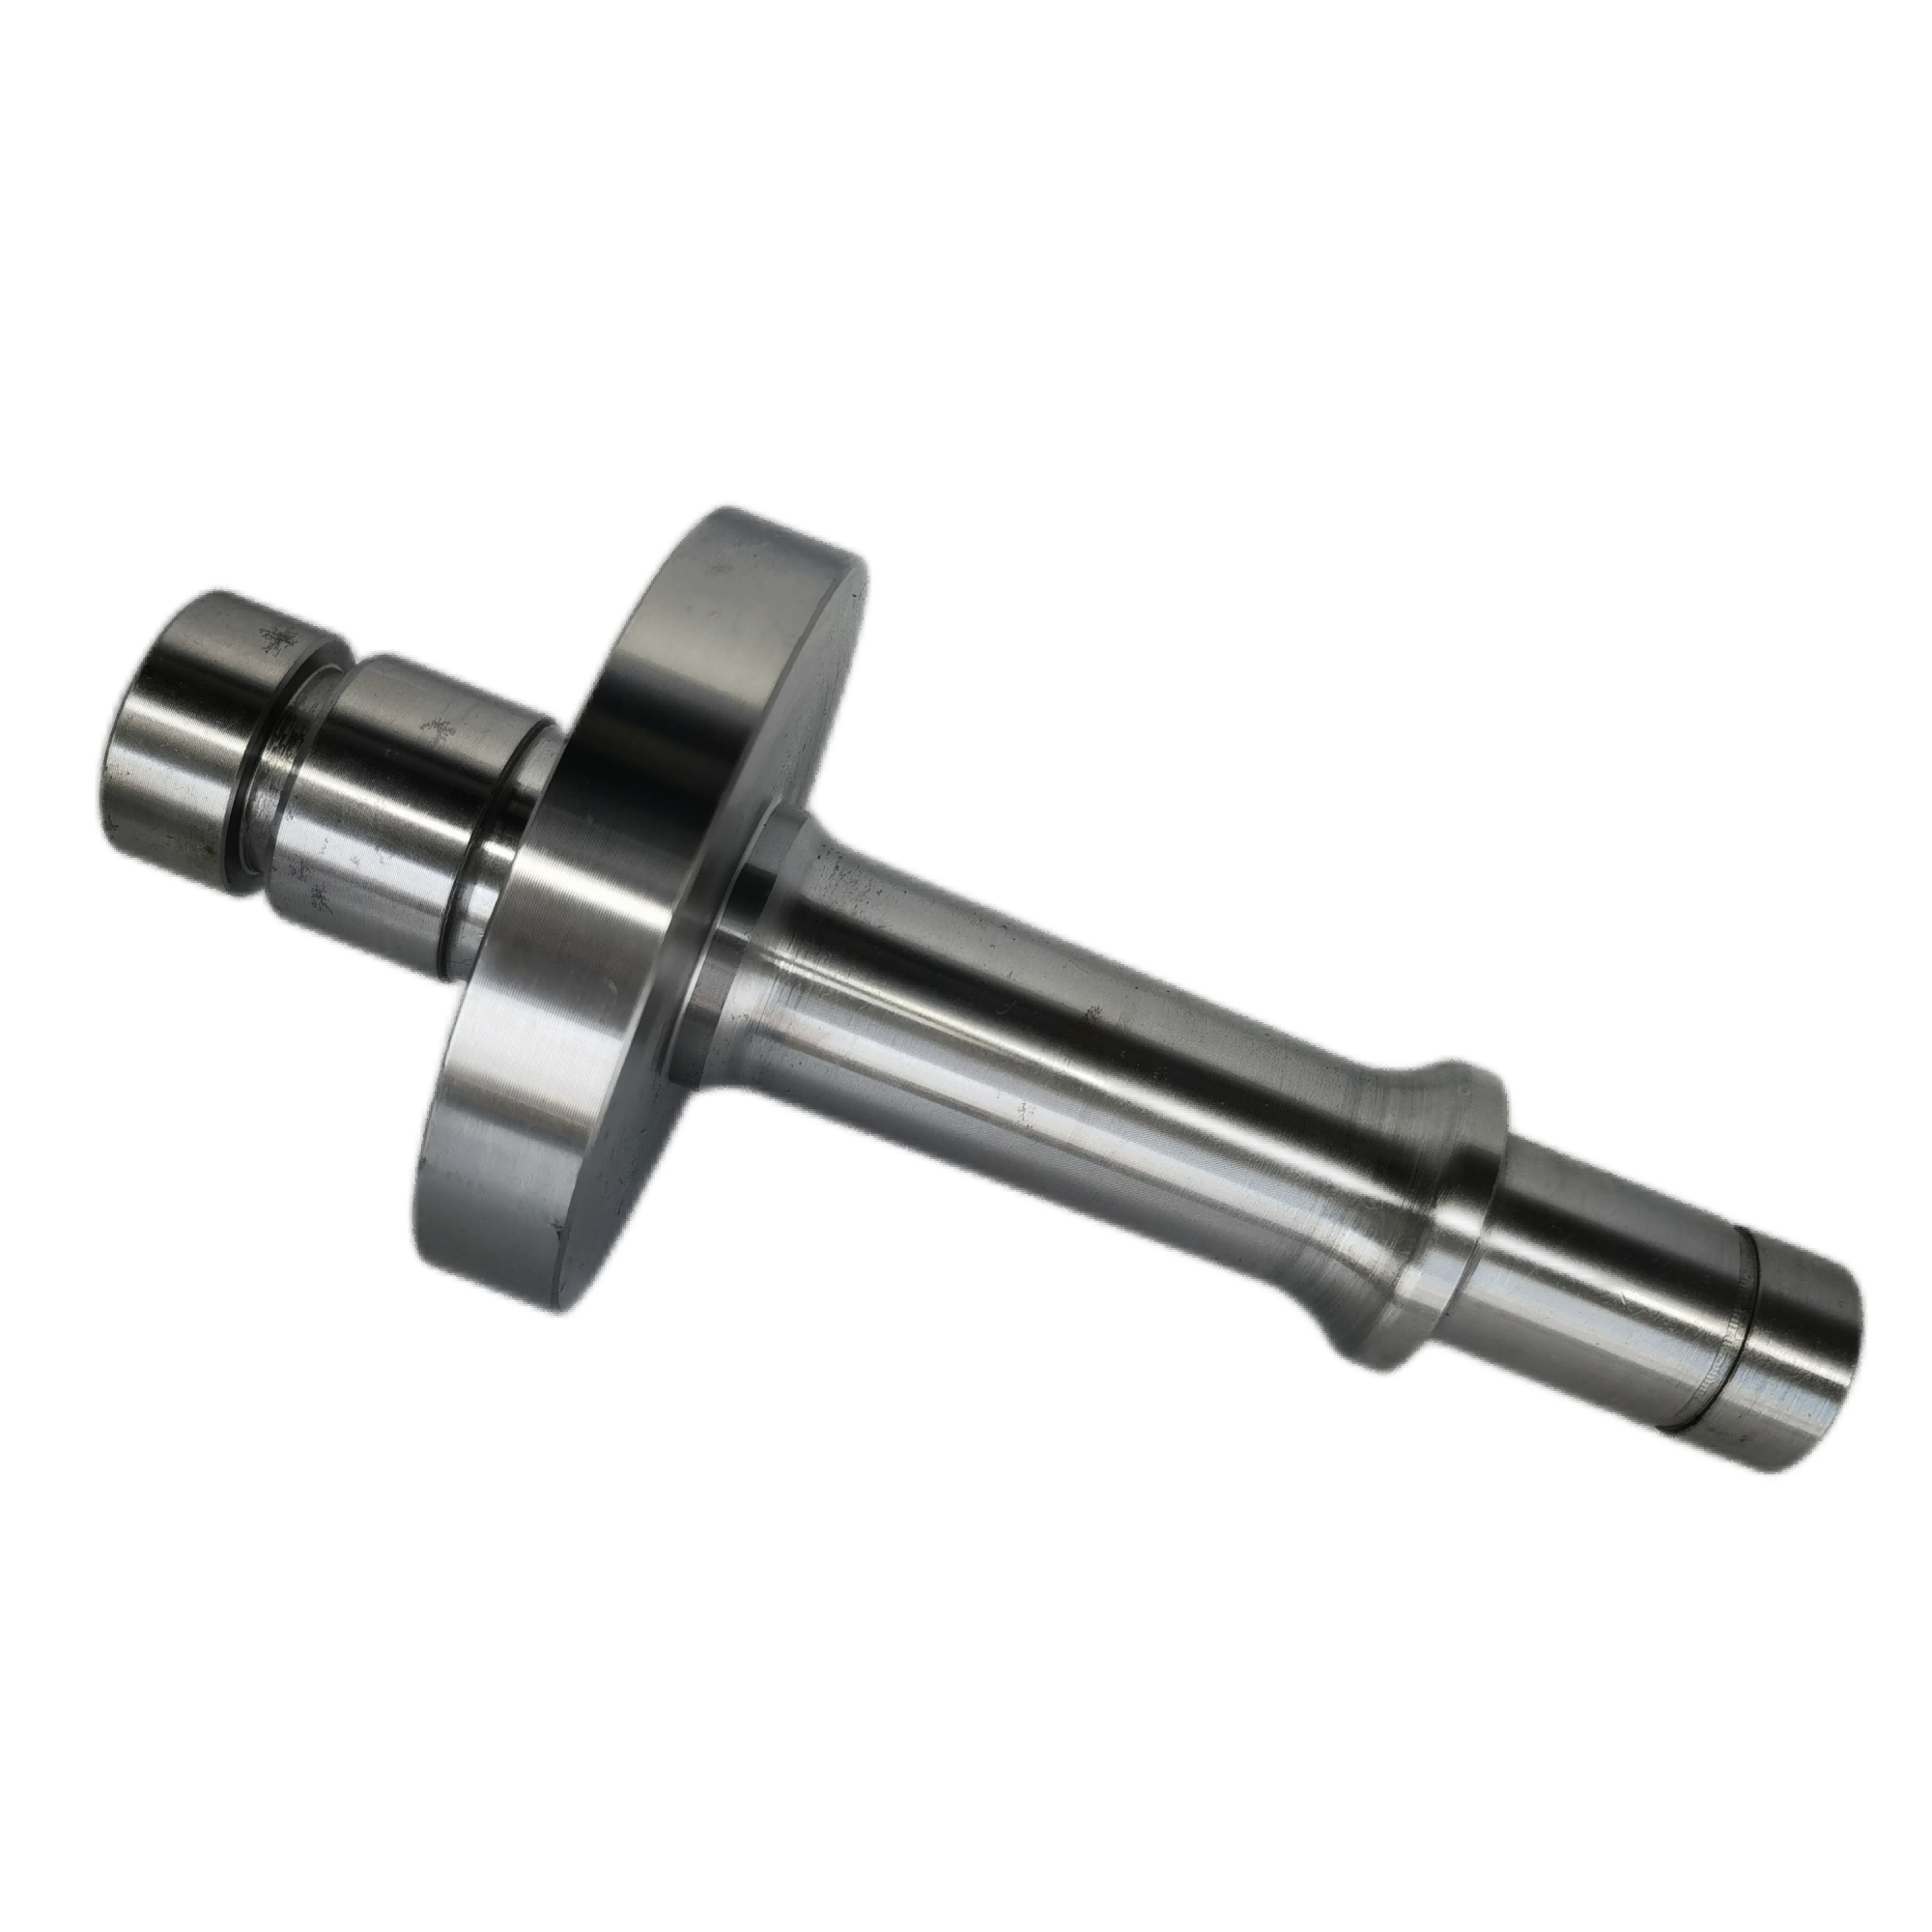 CNC turning axle assembly